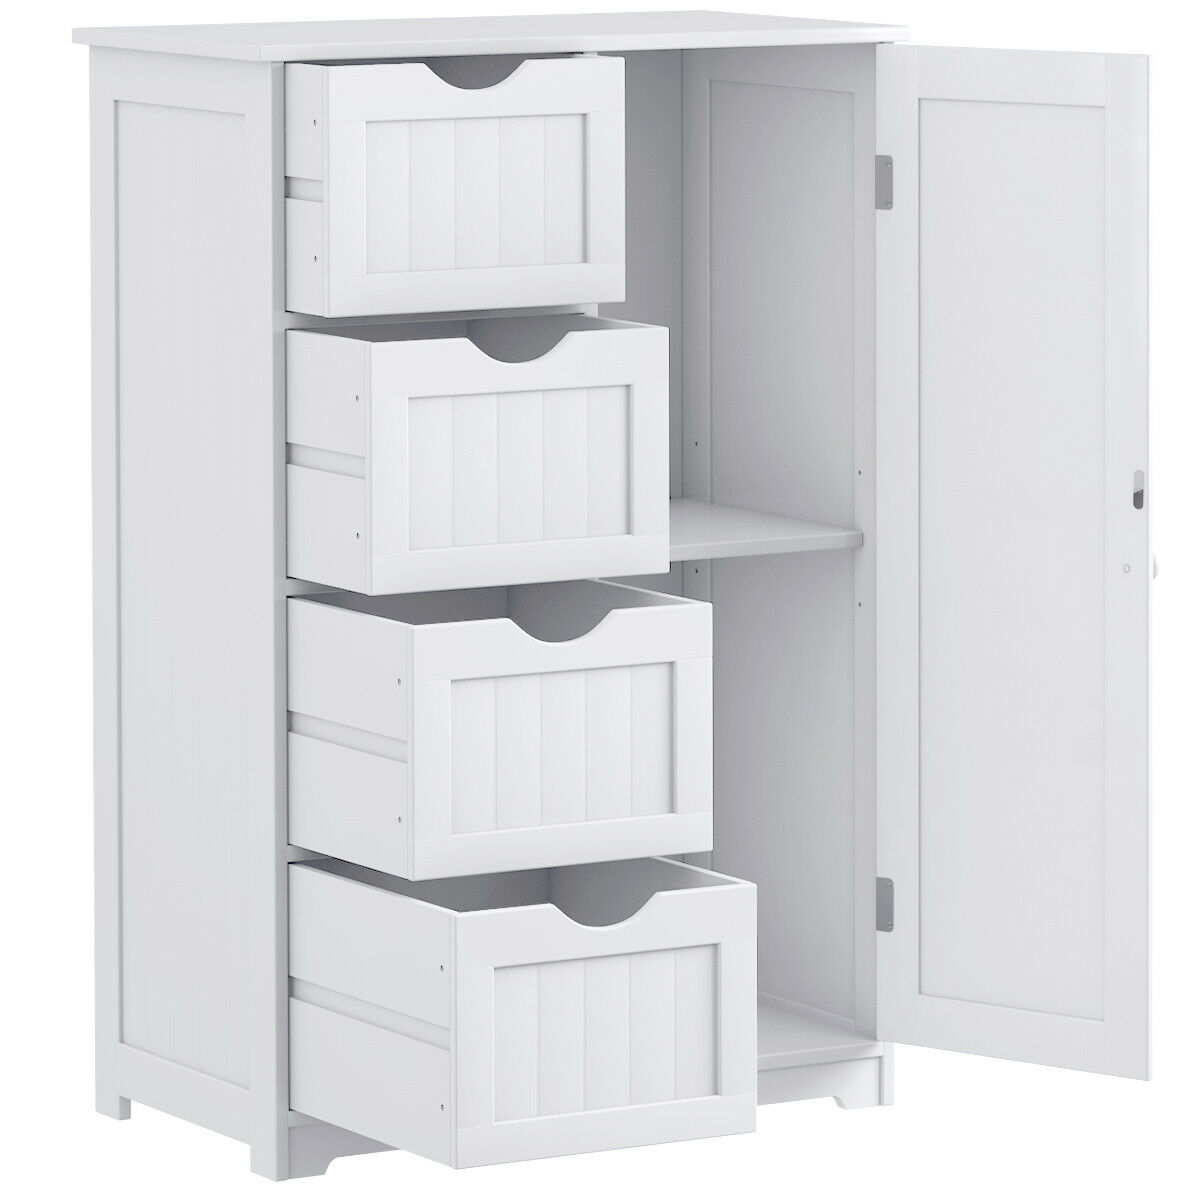 Costway Wooden 4 Drawer Bathroom Cabinet Storage Cupboard 2 Shelves Free Standing White - image 4 of 10